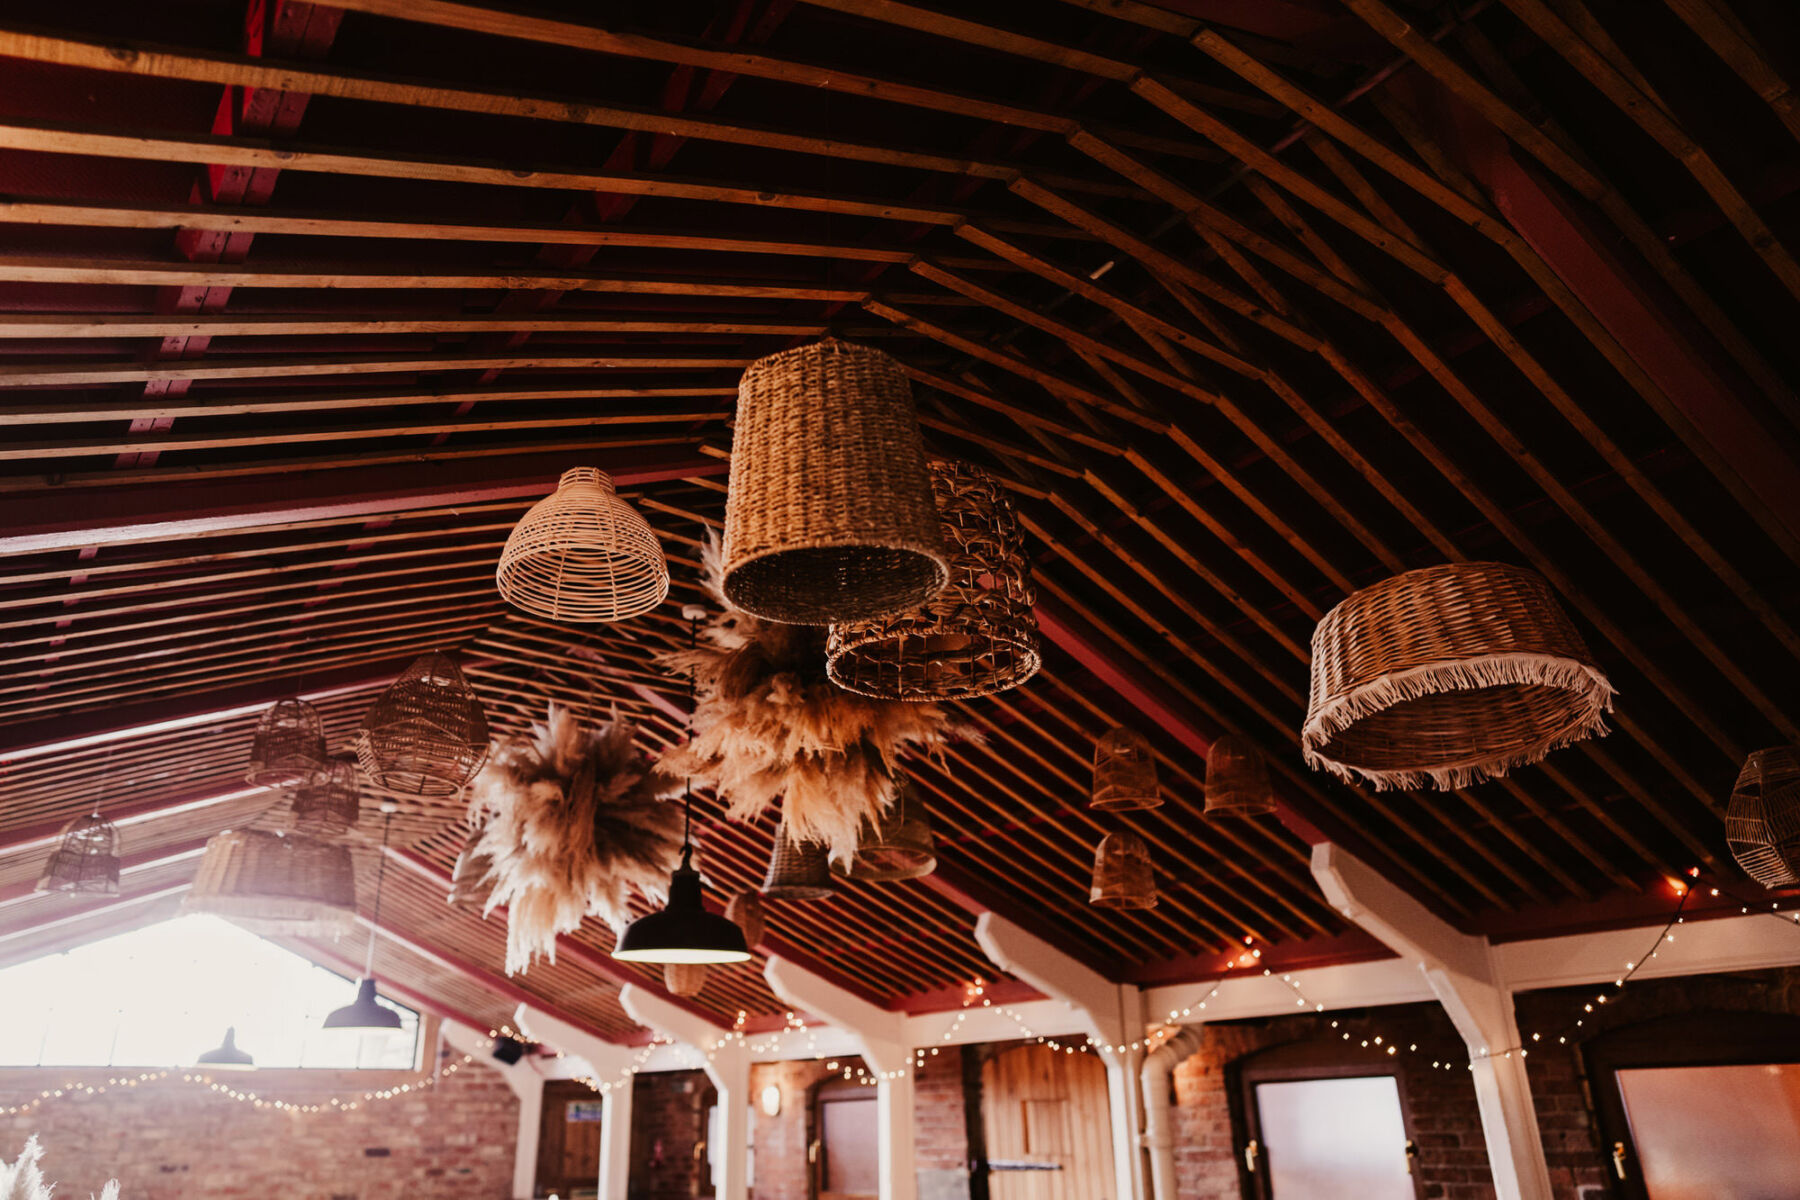 Ratton lampshades hanging from ceiling. Bohemian wedding decor.